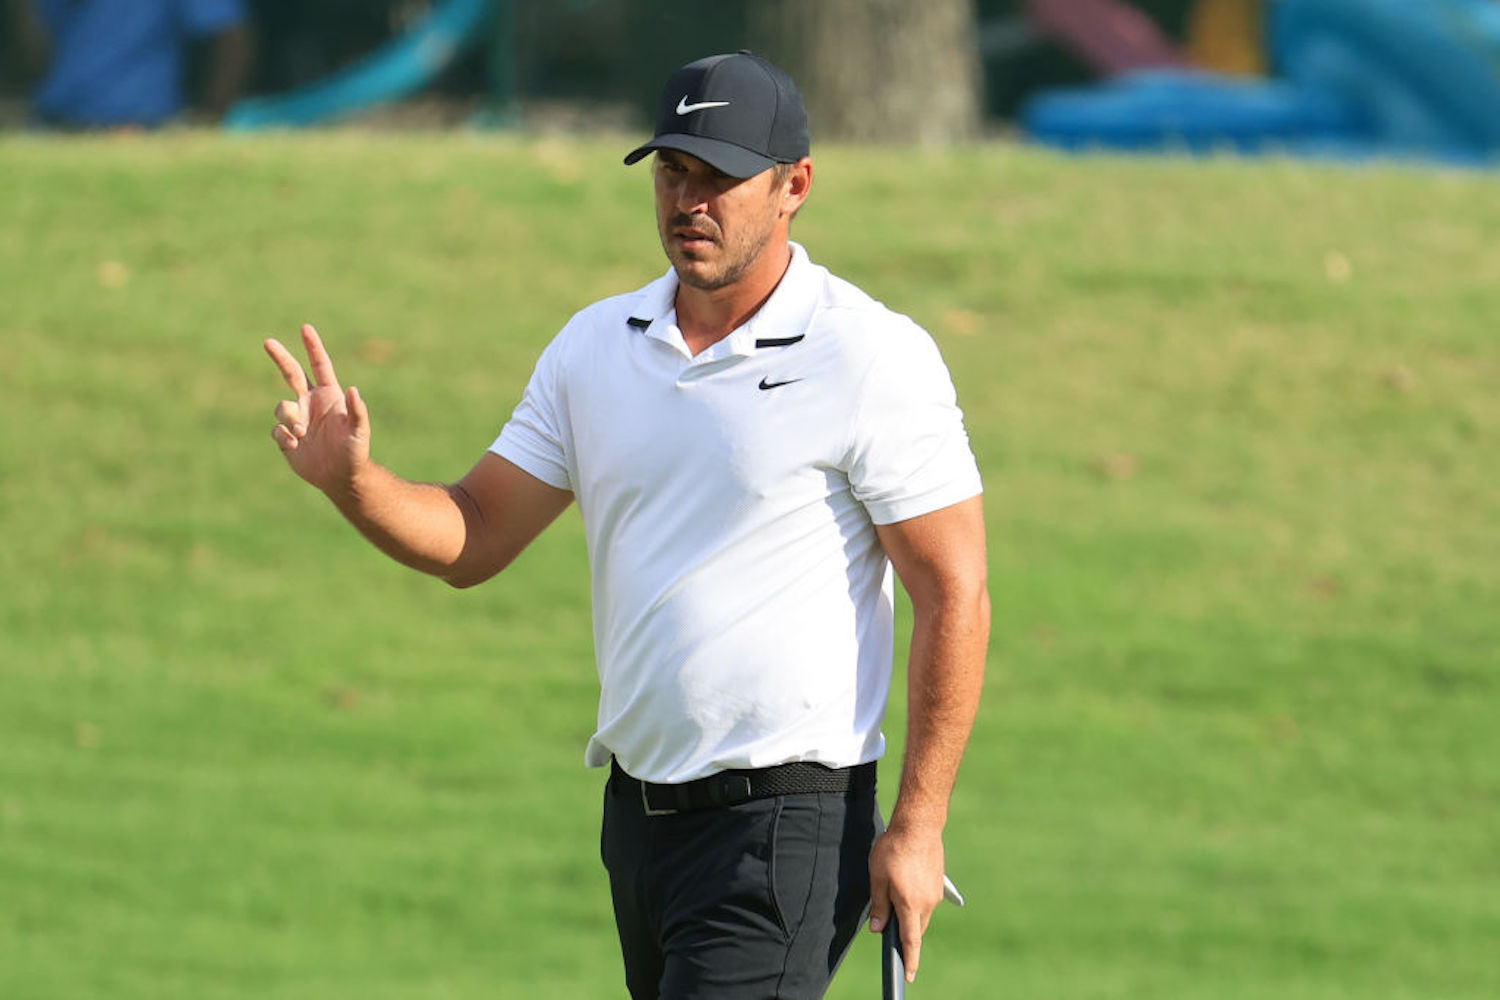 Brooks Koepka has had a mediocre 2020 season by his standards, but he's finally turning it on just in time for the PGA Championship.